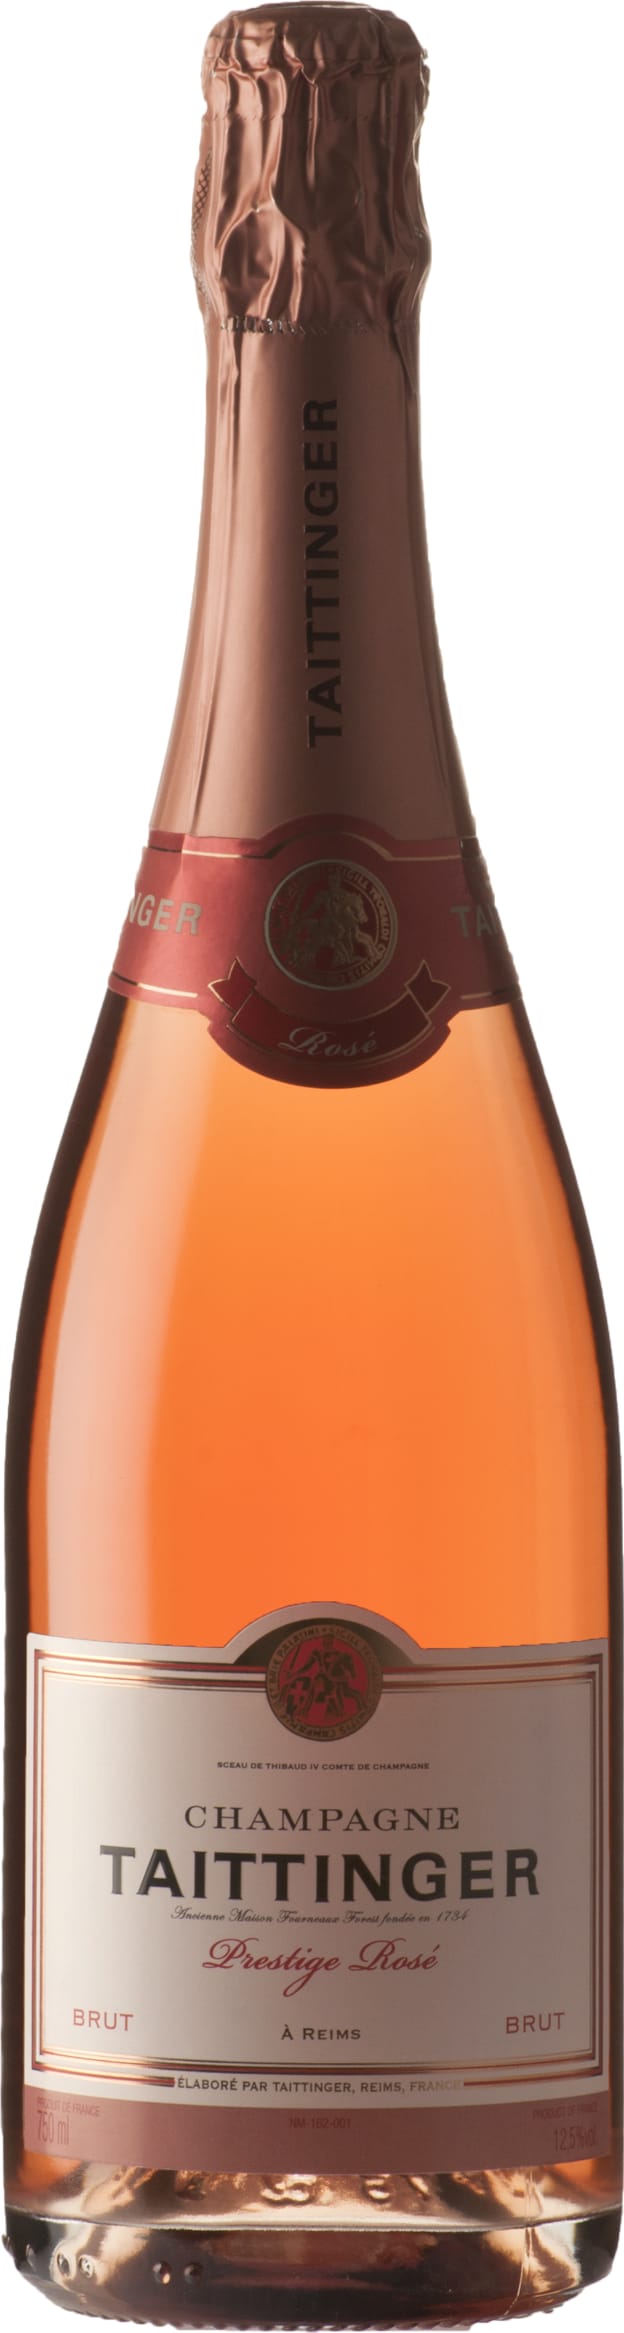 Taittinger Champagne Prestige Rose 75cl NV - Buy Taittinger Wines from GREAT WINES DIRECT wine shop